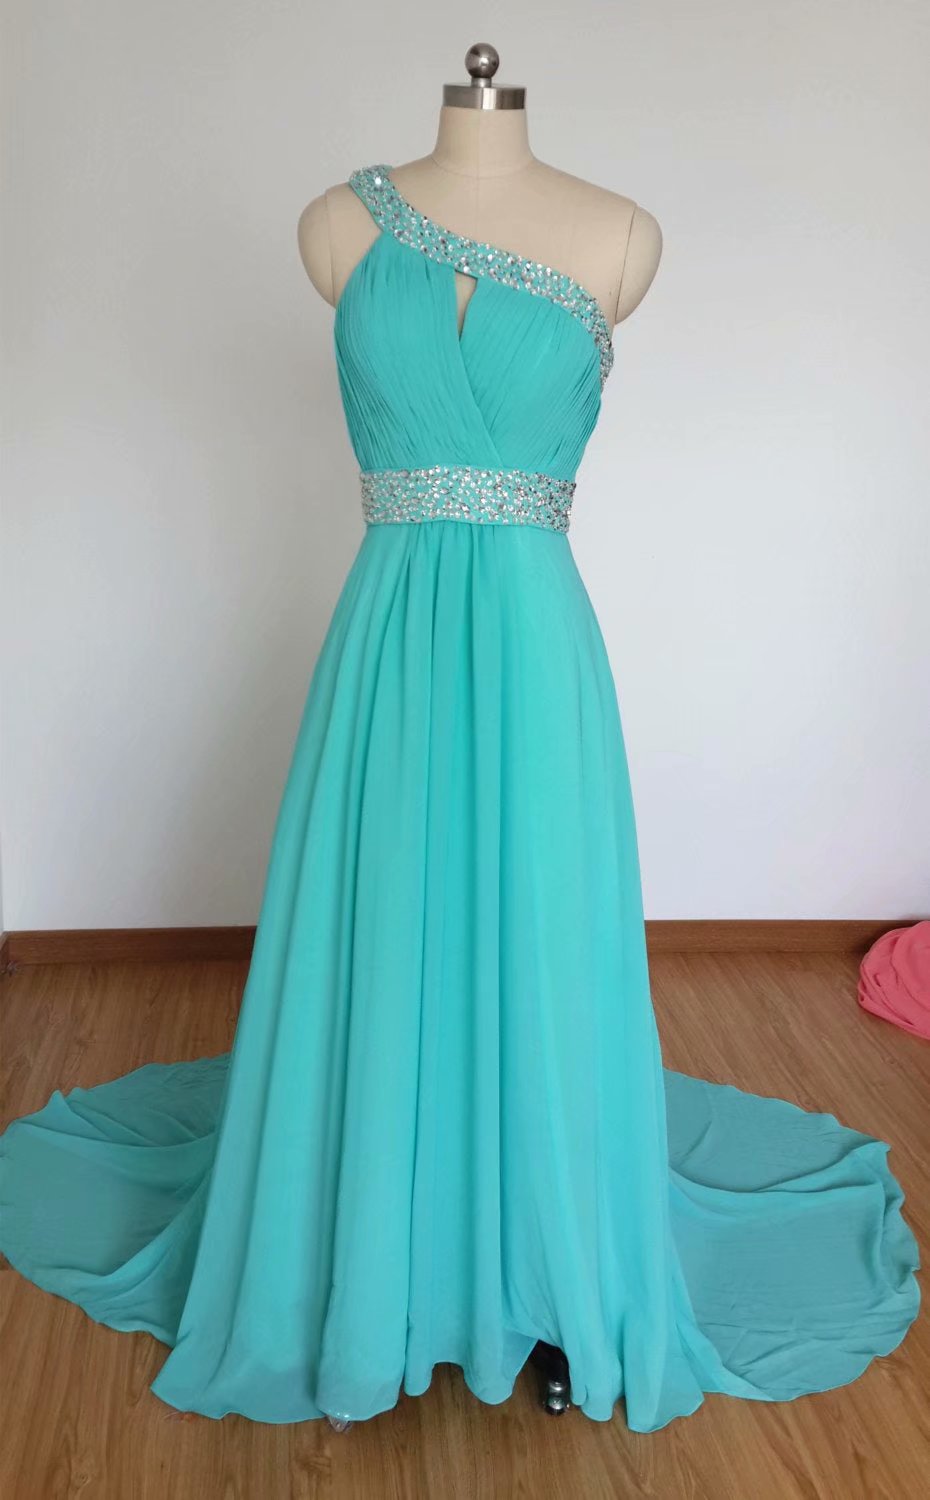 2019 One Shoulder Chiffon Evening Dresses A Line Prom Gowns